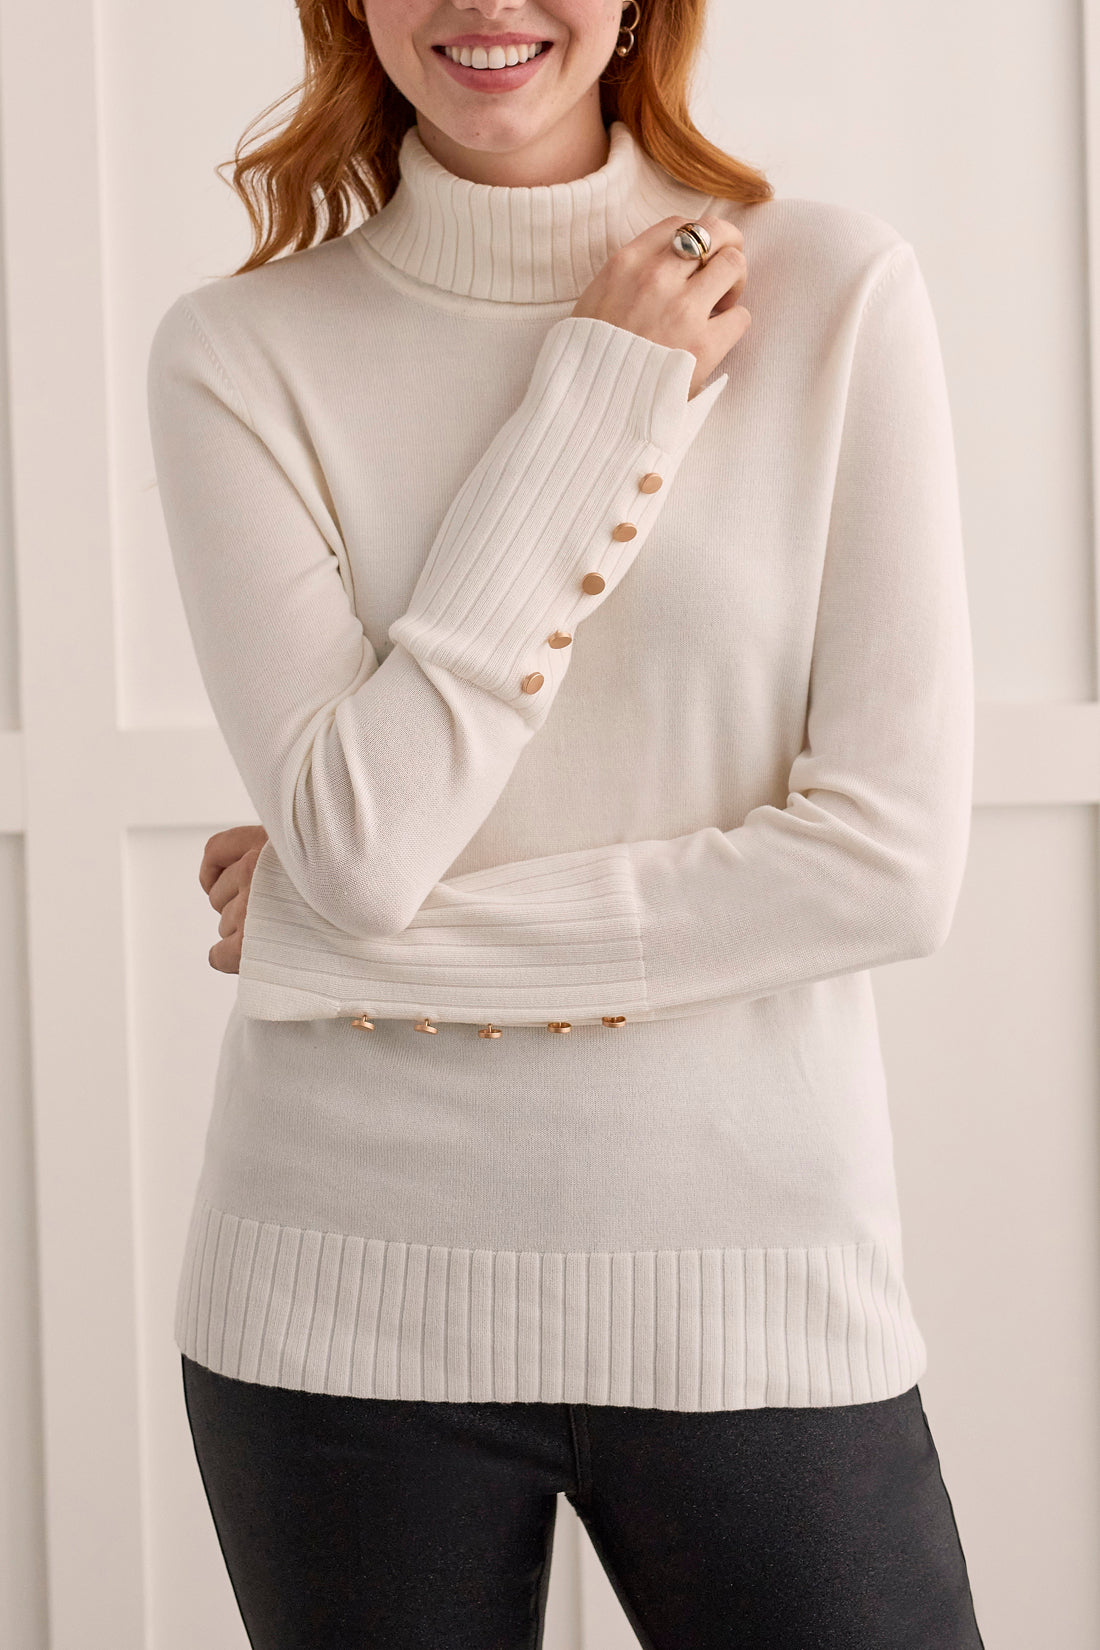 Turtleneck Sweater With Button Detail 1490O-835